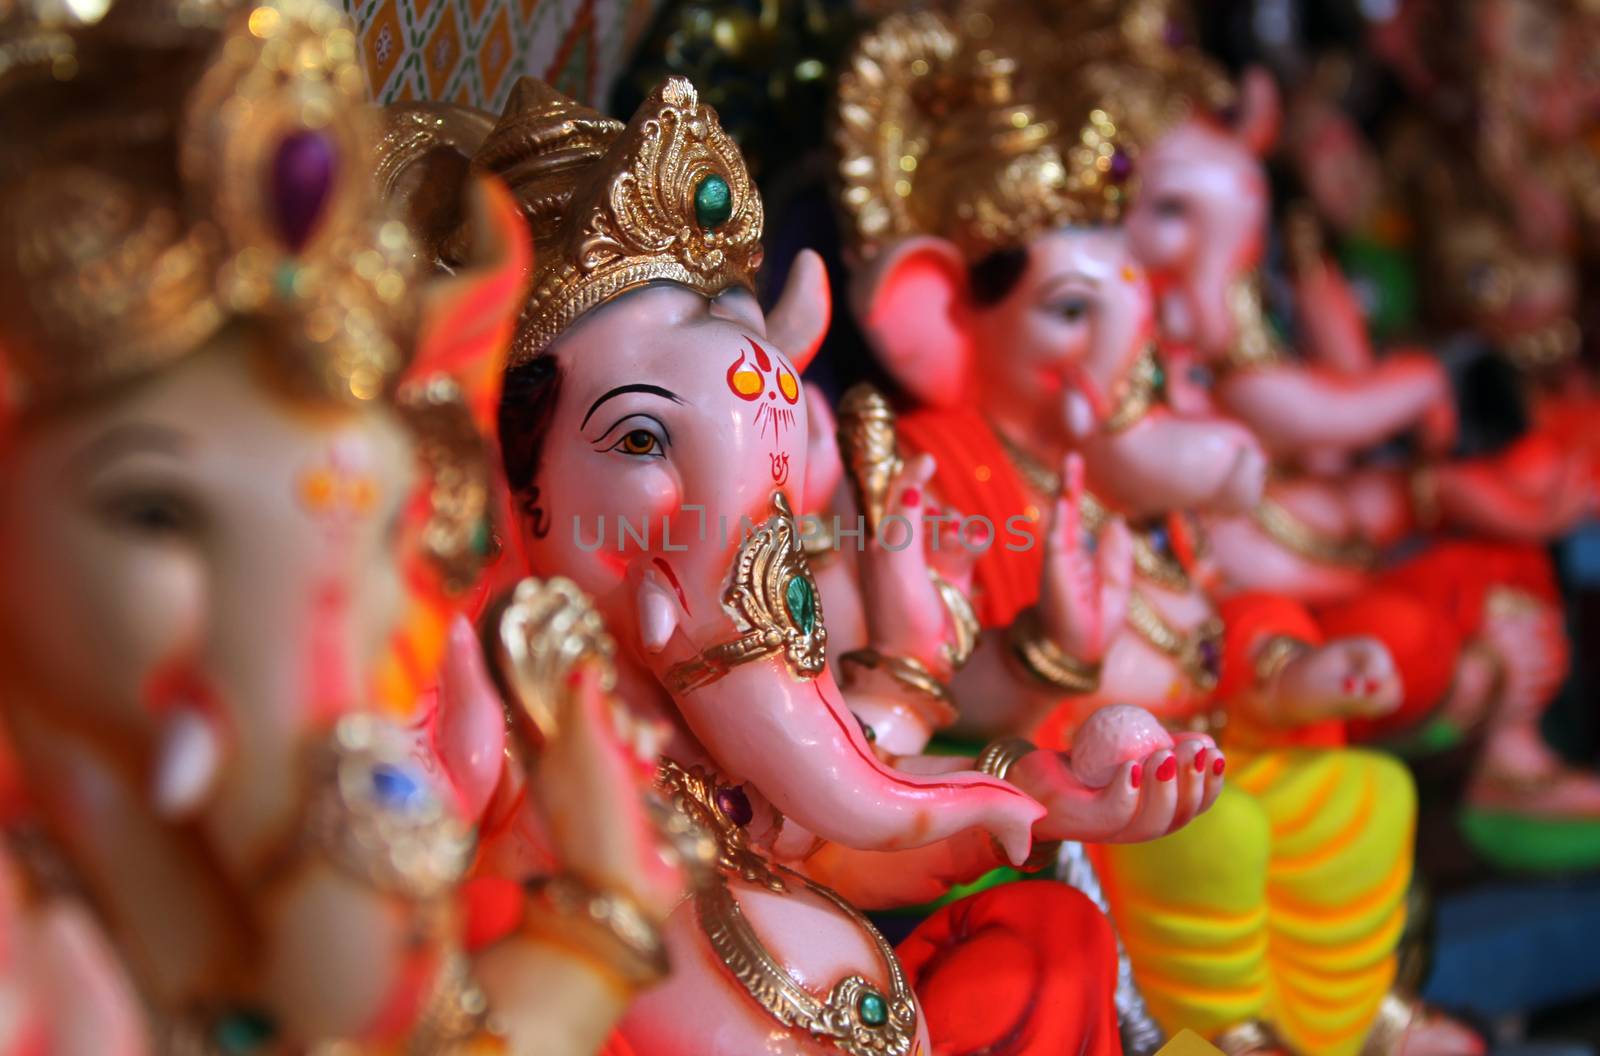 Beautiful idols of Lord Ganesha for sale in a Shop by thefinalmiracle